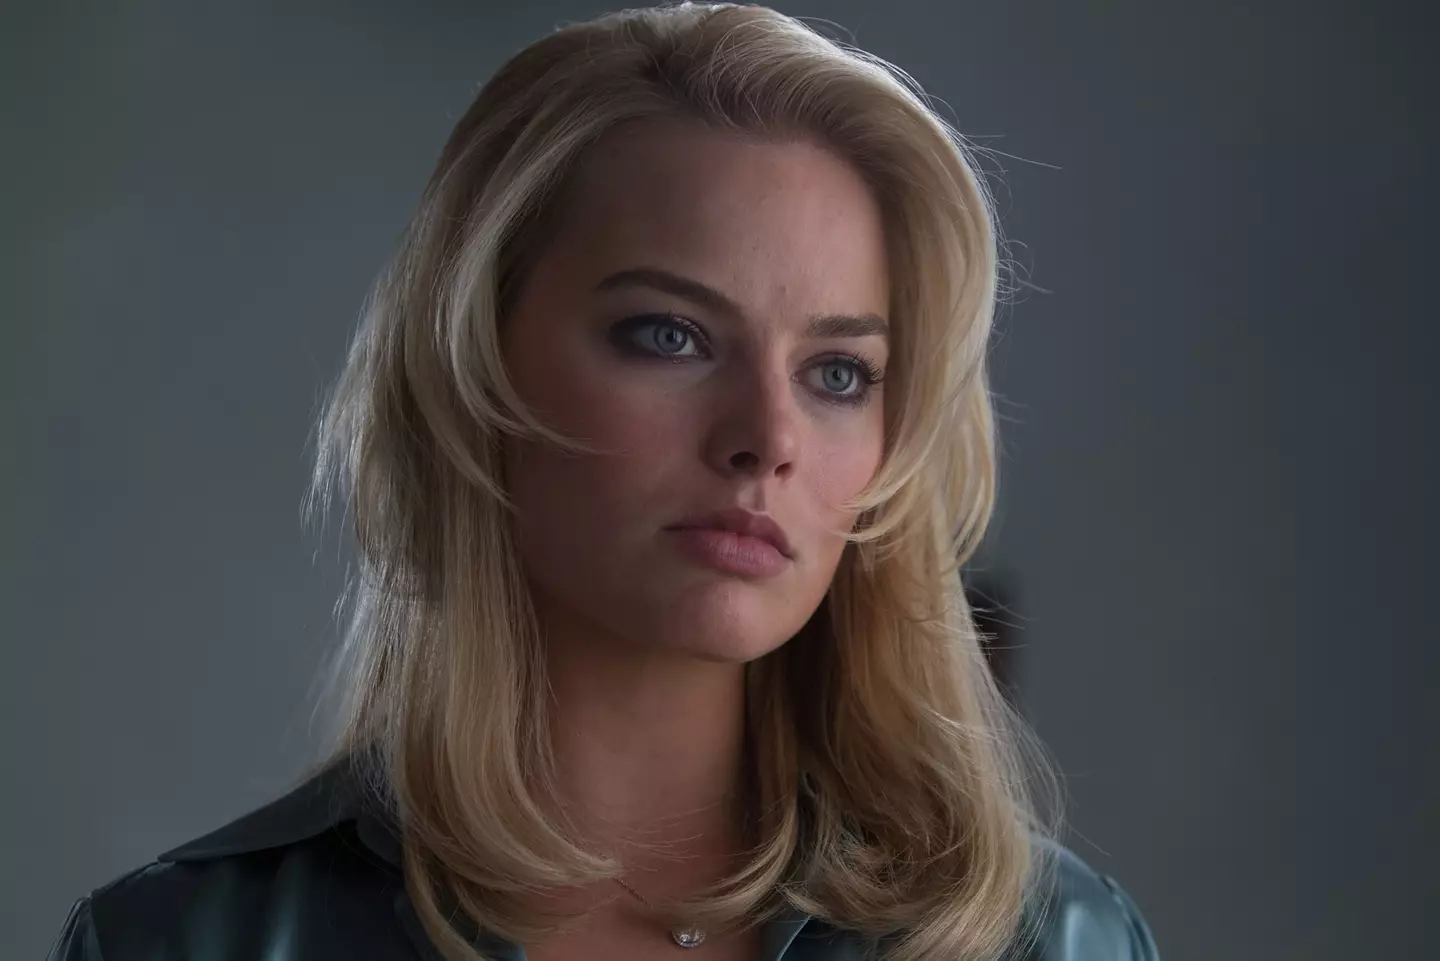 Margot Robbie didn't think people would notice her in The Wolf of Wall Street.